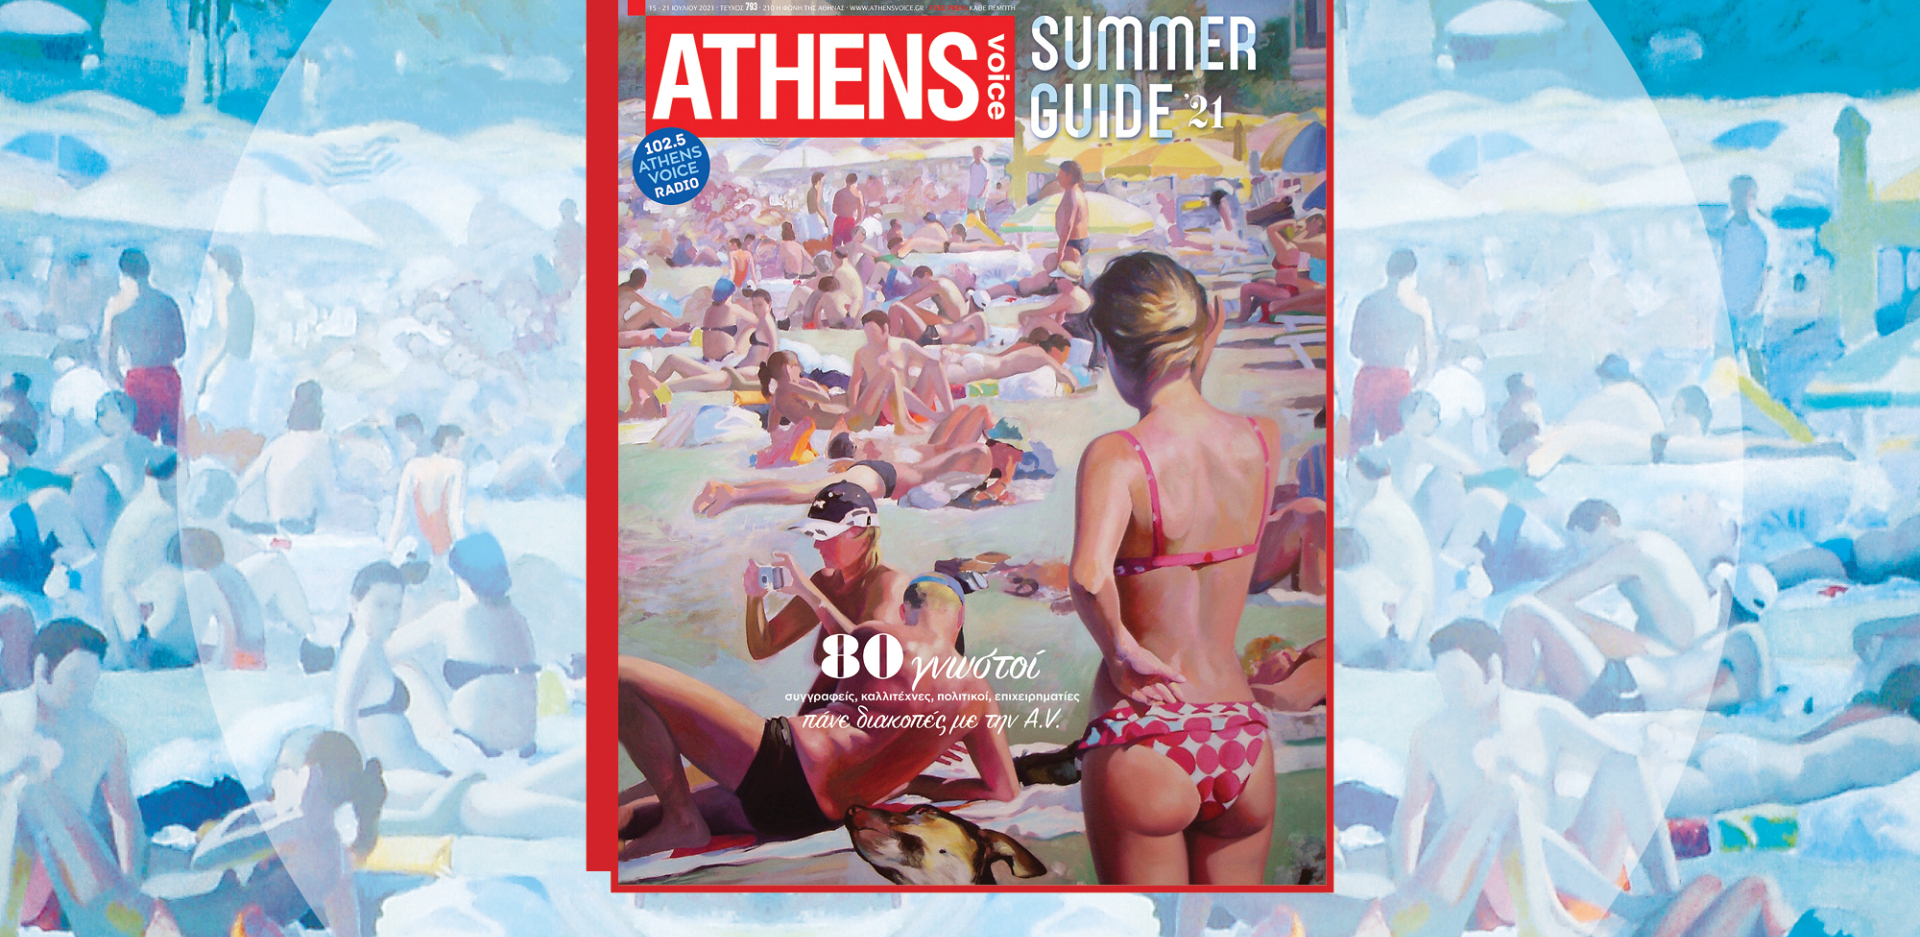 Summer Guide 2021: 80 γνωστοί πάνε διακοπές με την ATHENS VOICE